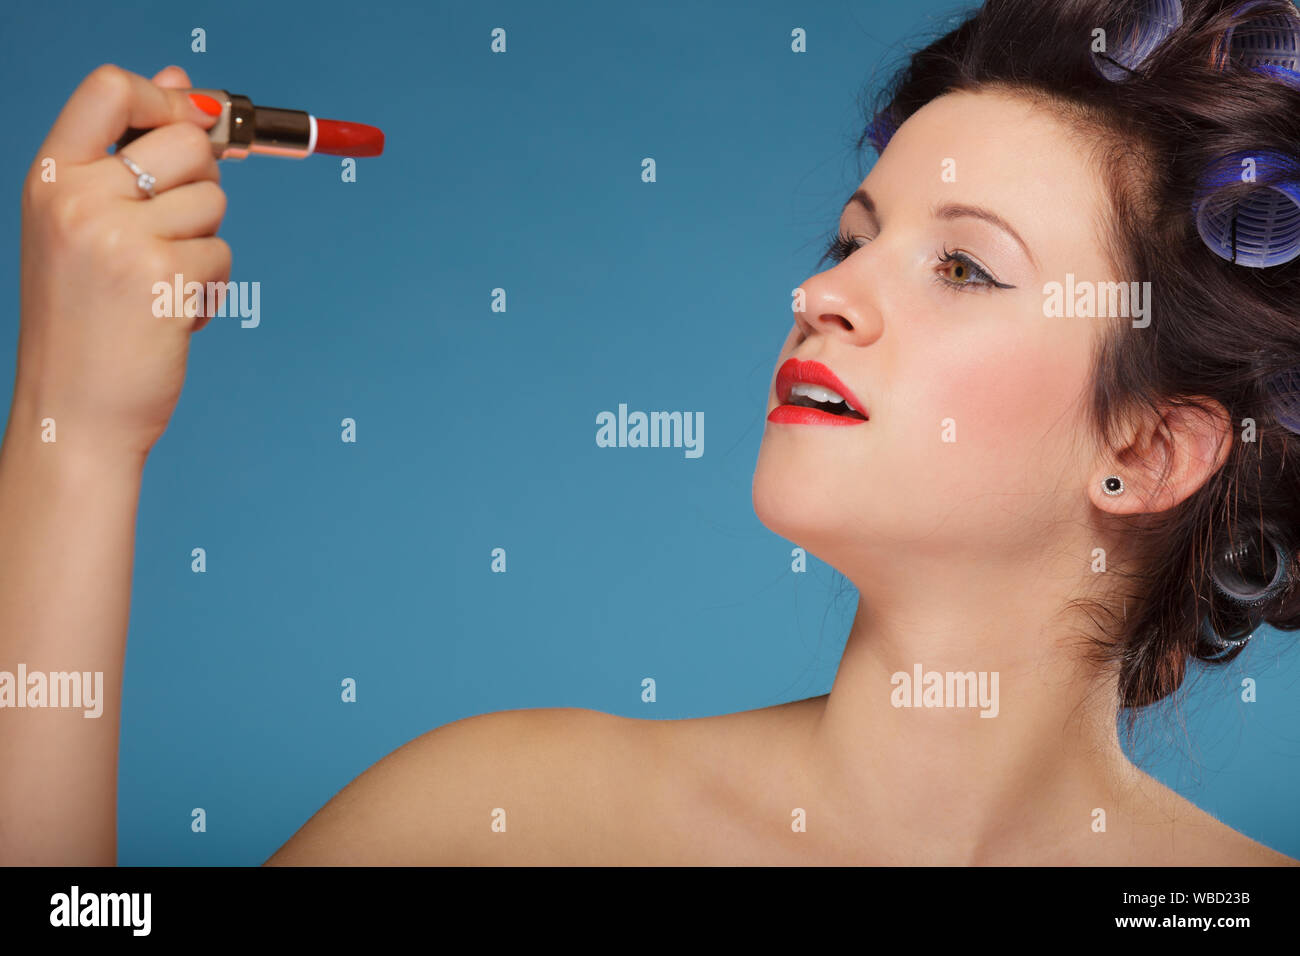 Young woman preparing to party, girl styling hair with curlers, applying makeup red lipstick retro style blue background Stock Photo